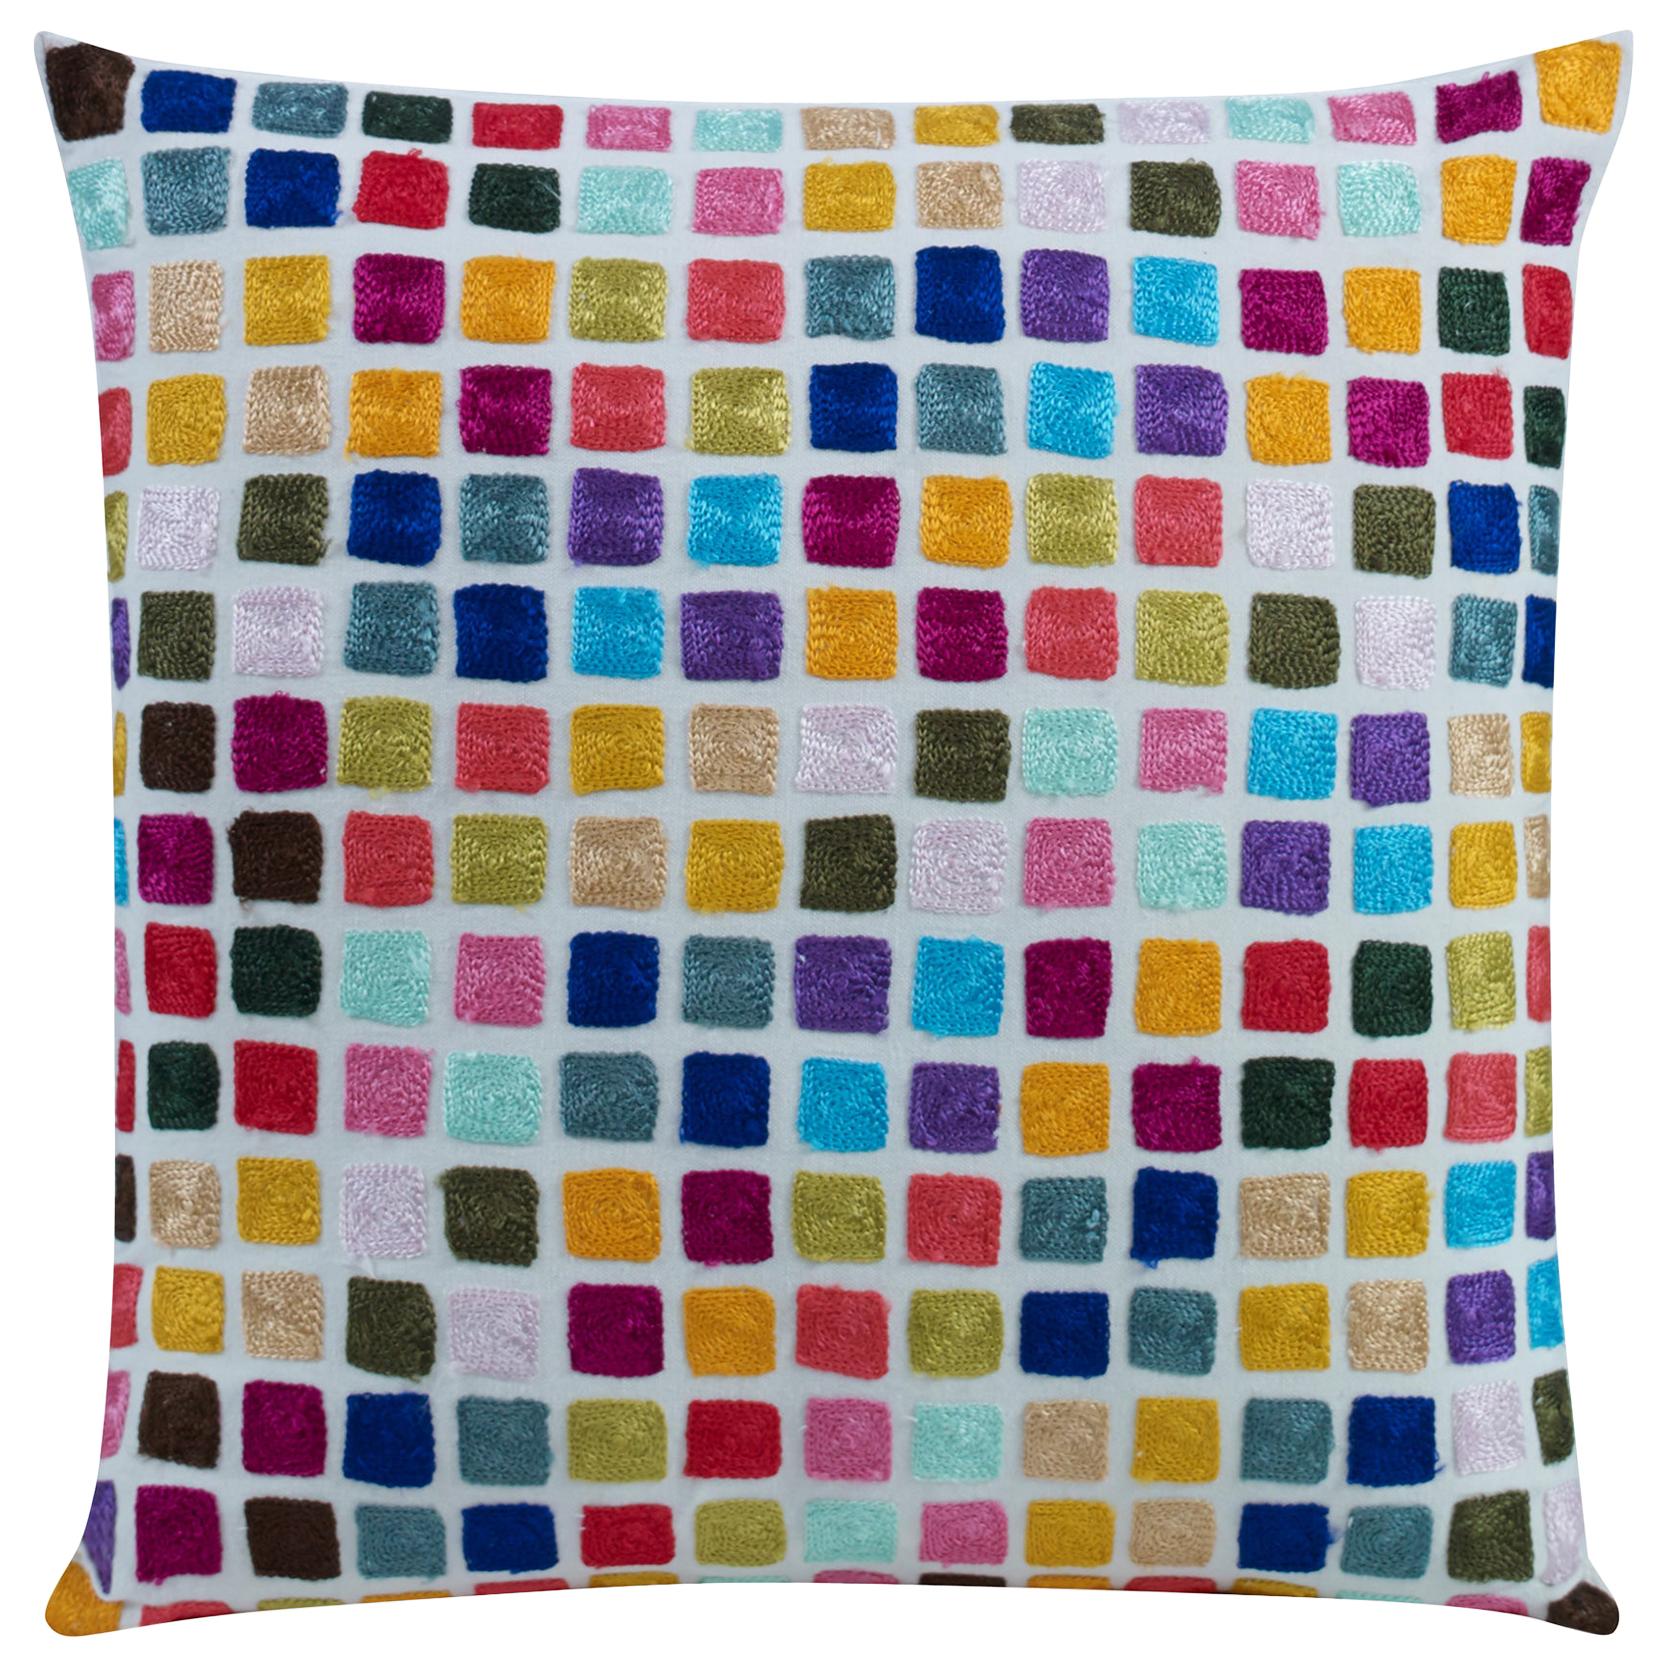 Luna Hand-embroidered Accent Pillow with Colorful Pattern by CuratedKravet